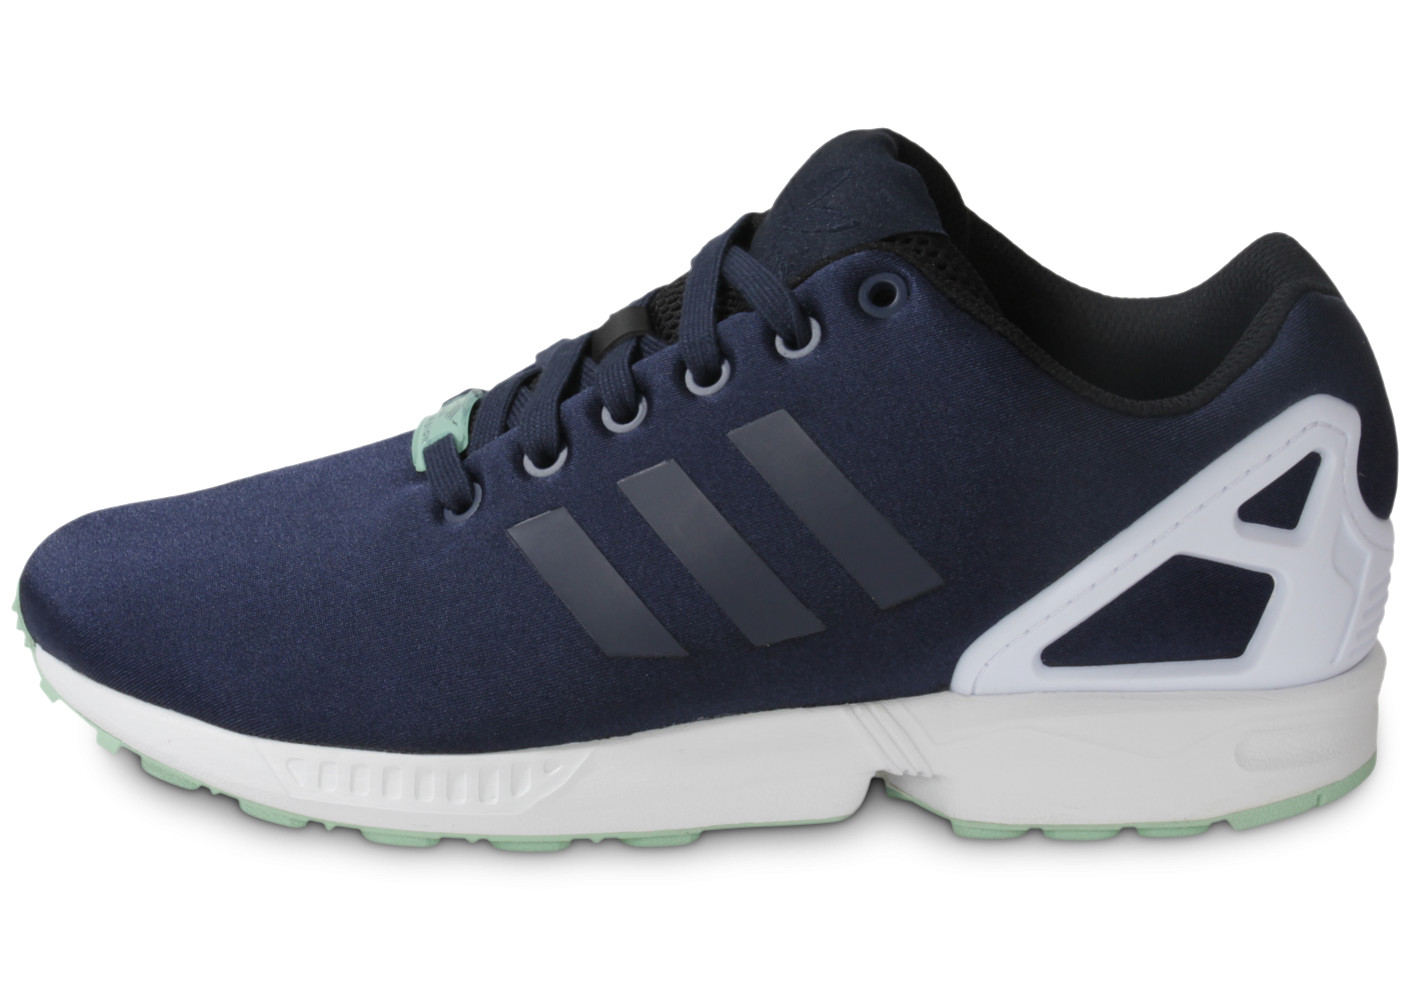 adidas zx 300 homme pas cher